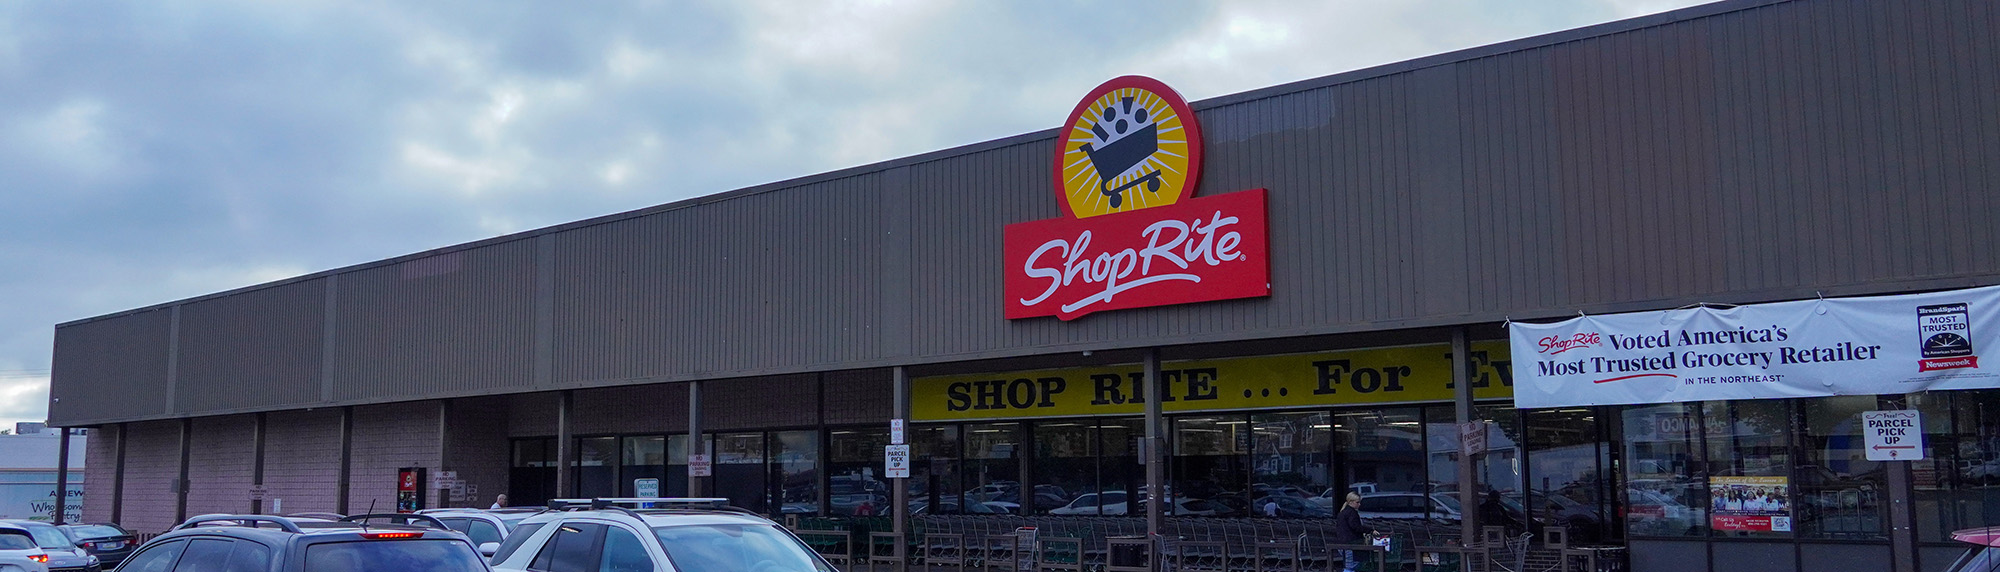 ShopRite of Knorr Street - Manager Placeholder